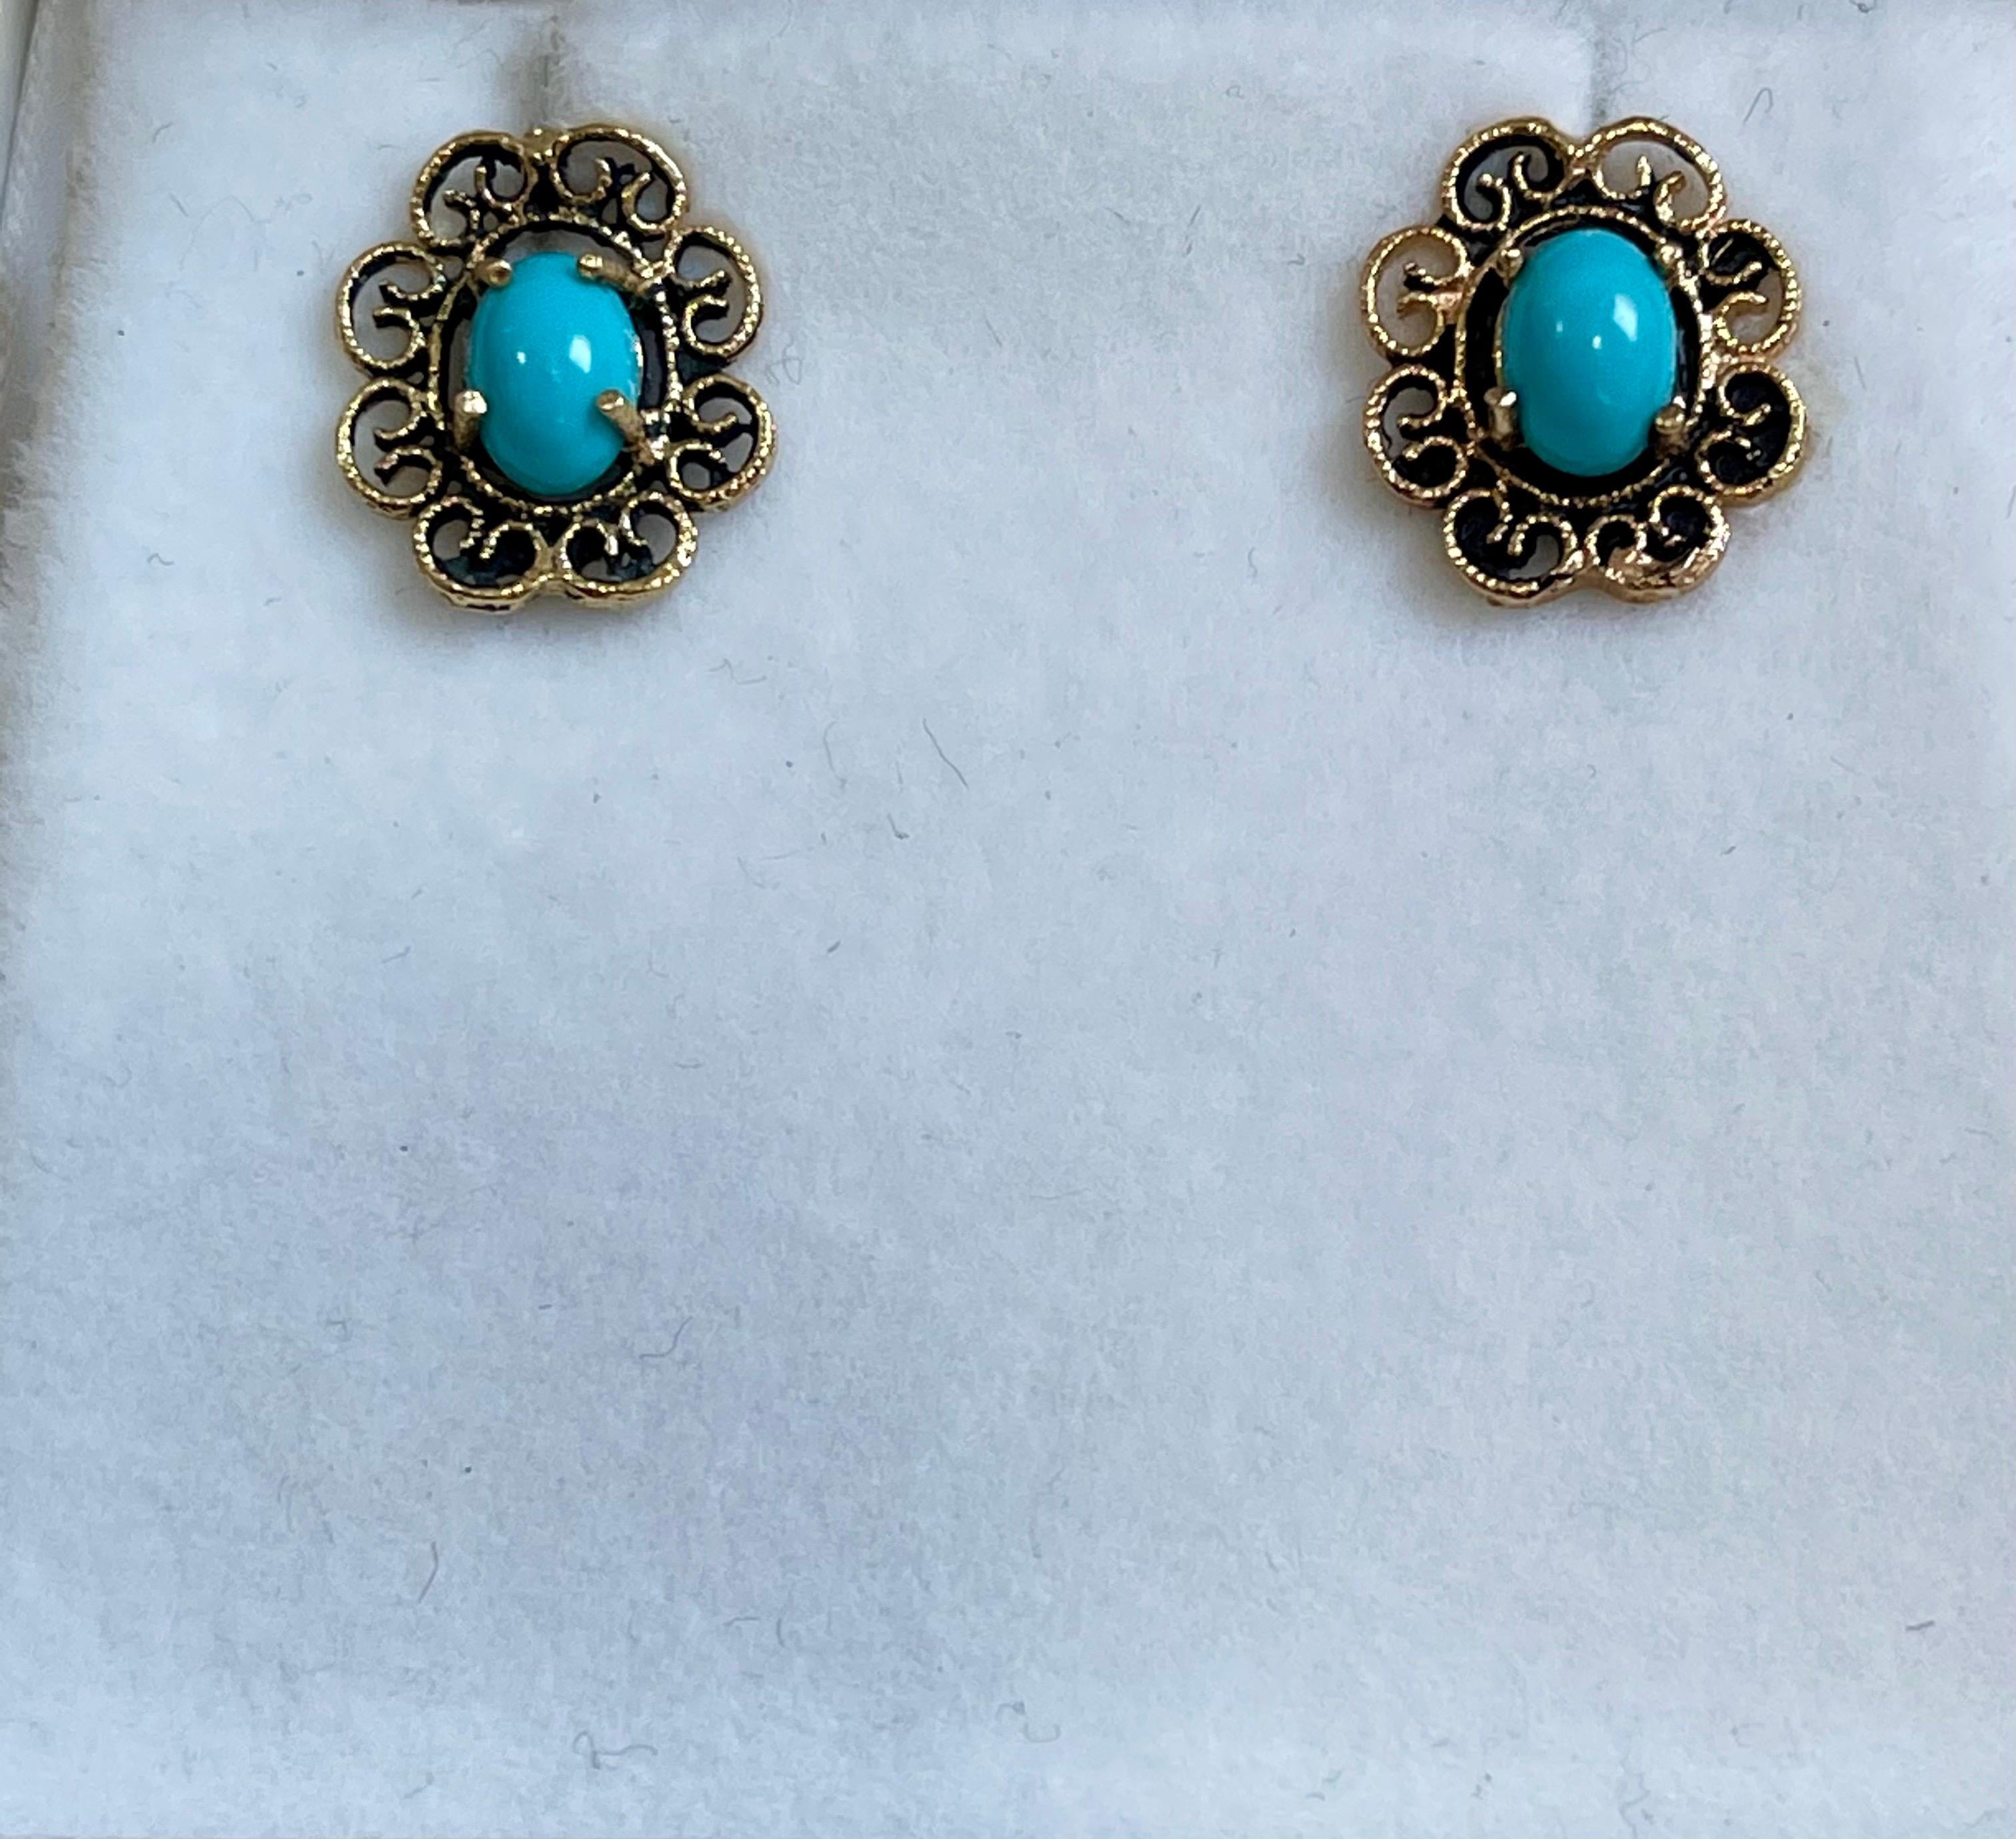 Approximately 1 Carat Turquoise 14 Karat Yellow Gold Earrings, Stud Post Earring, Vintage 
Beautiful pair of earrings  finely crafted in  14 Karat  solid Yellow gold.
 Two oval shape Turquoise , approximately 1 ct of Turquoise are sitting in the